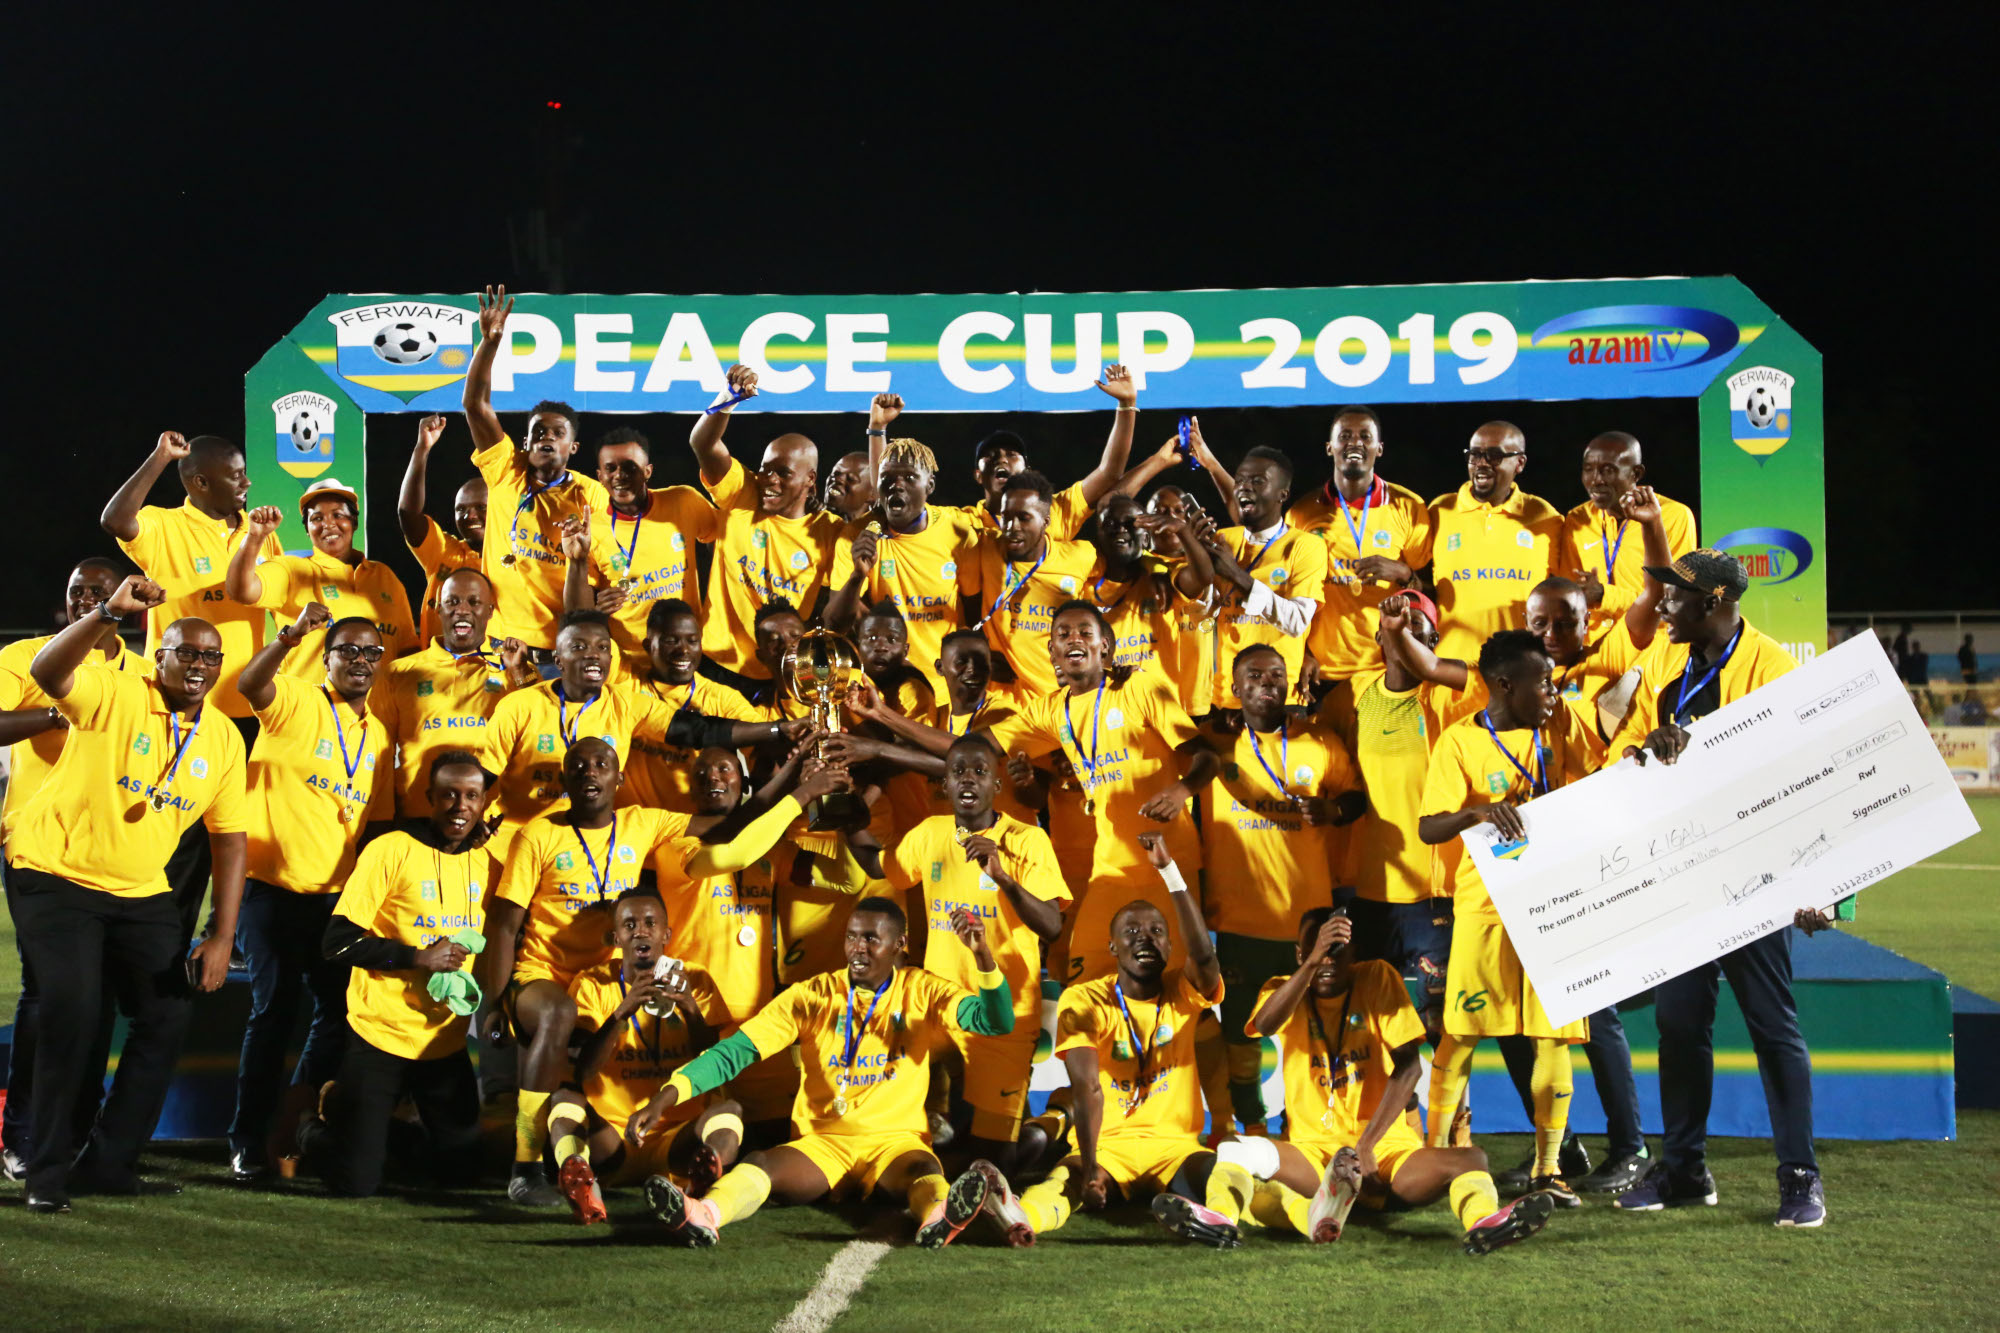 AS Kigali players and staff celebrate with the trophy and Rwf10 million dummy cheque after beating SC Kiyovu 2-1 in the 2019 Peace Cup final at Kigali Stadium on Thursday. / Sam Ngendahimana